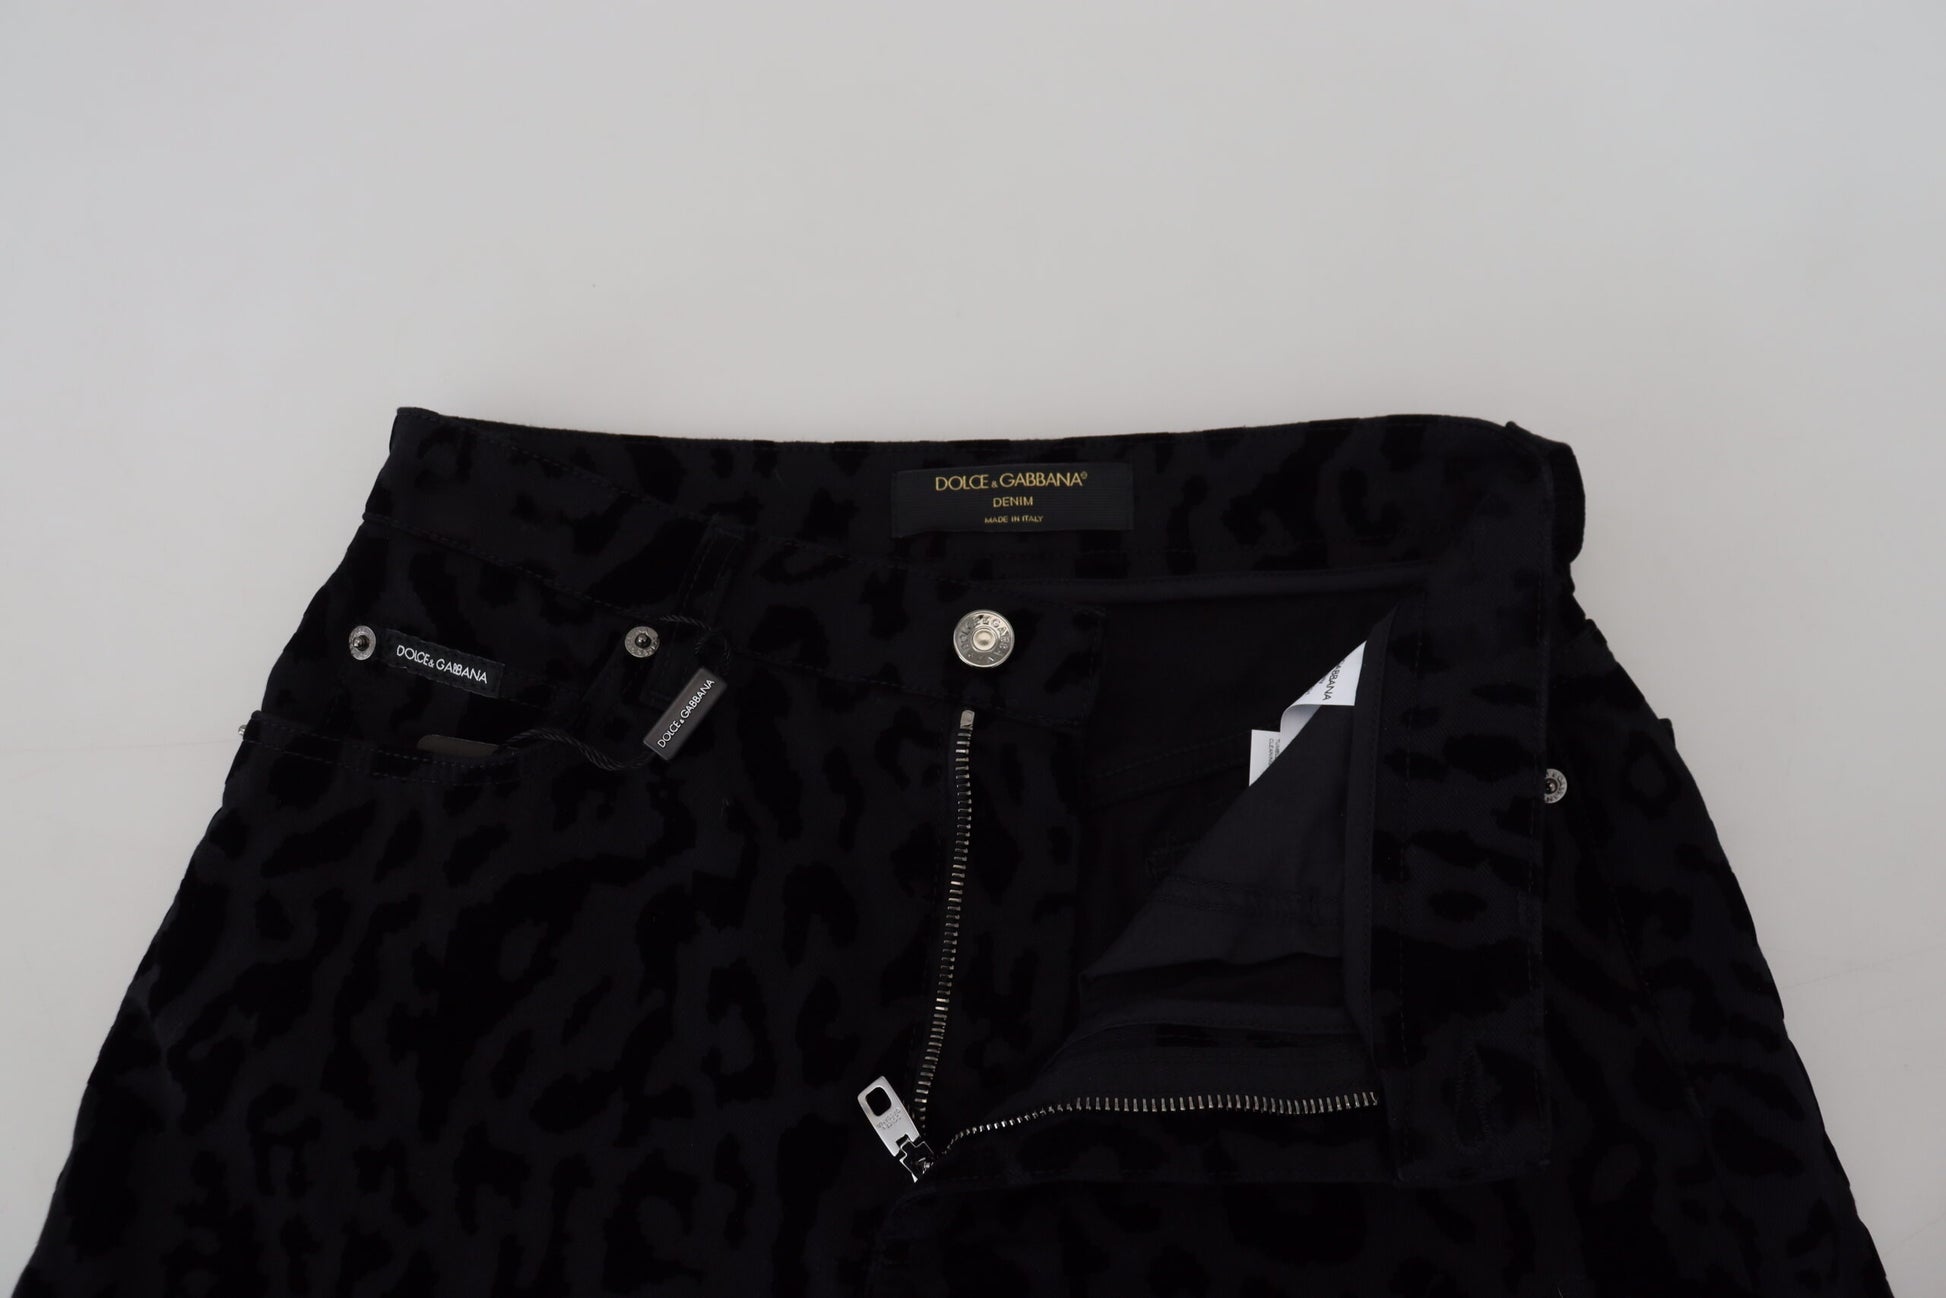 Black Denim Cotton Stretch Hot Pants Shorts - Designed by Dolce & Gabbana Available to Buy at a Discounted Price on Moon Behind The Hill Online Designer Discount Store